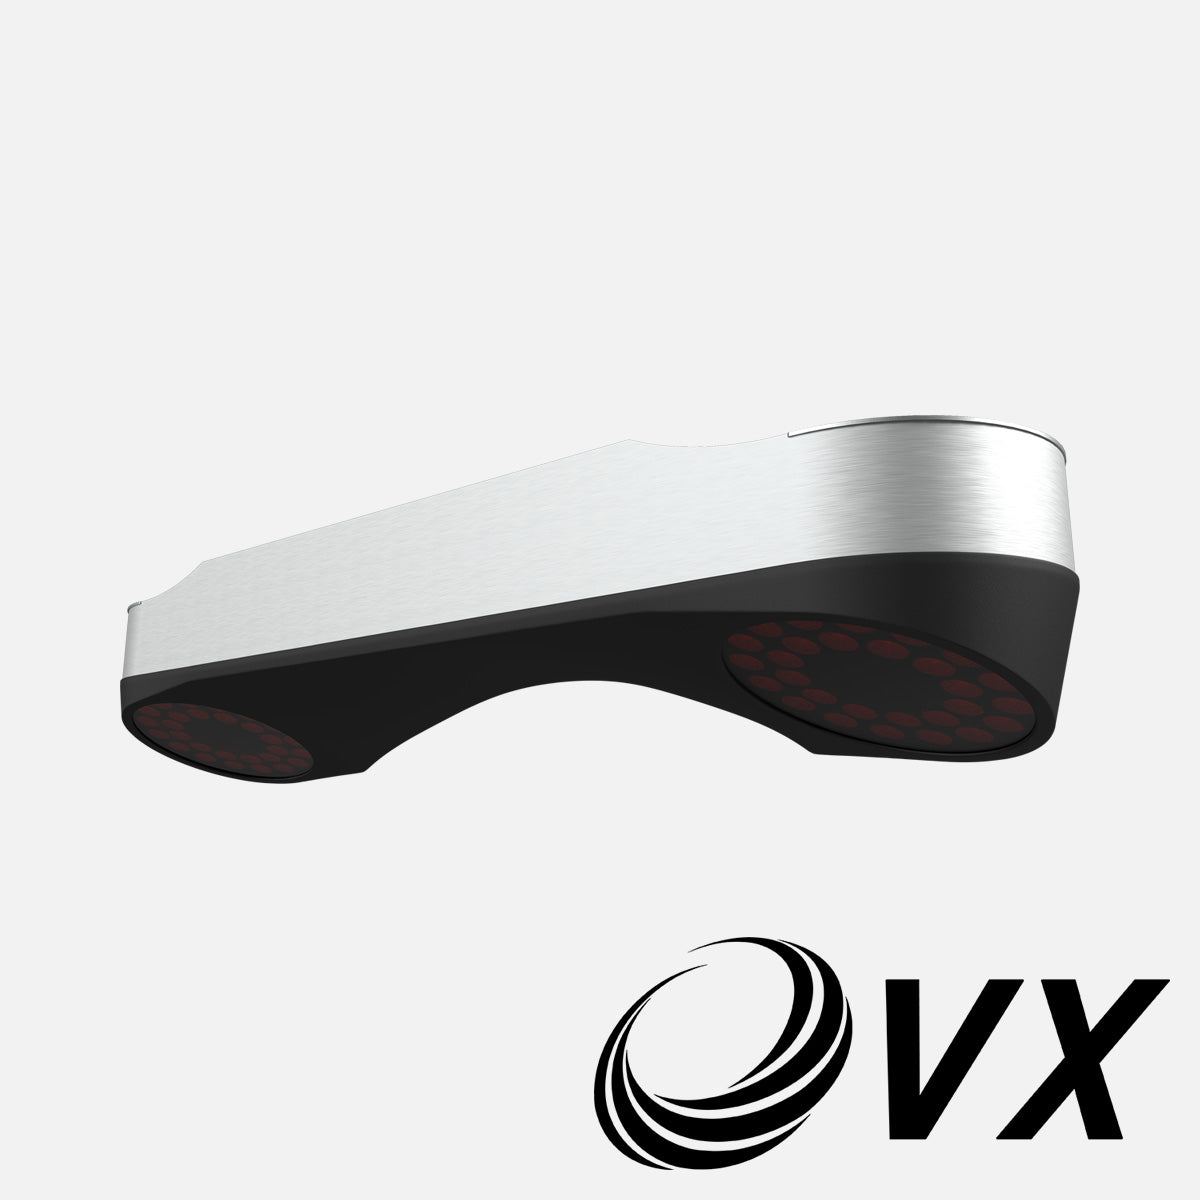 ProTee VX Launch Monitor (Available Now! Order Now supplies are limited)